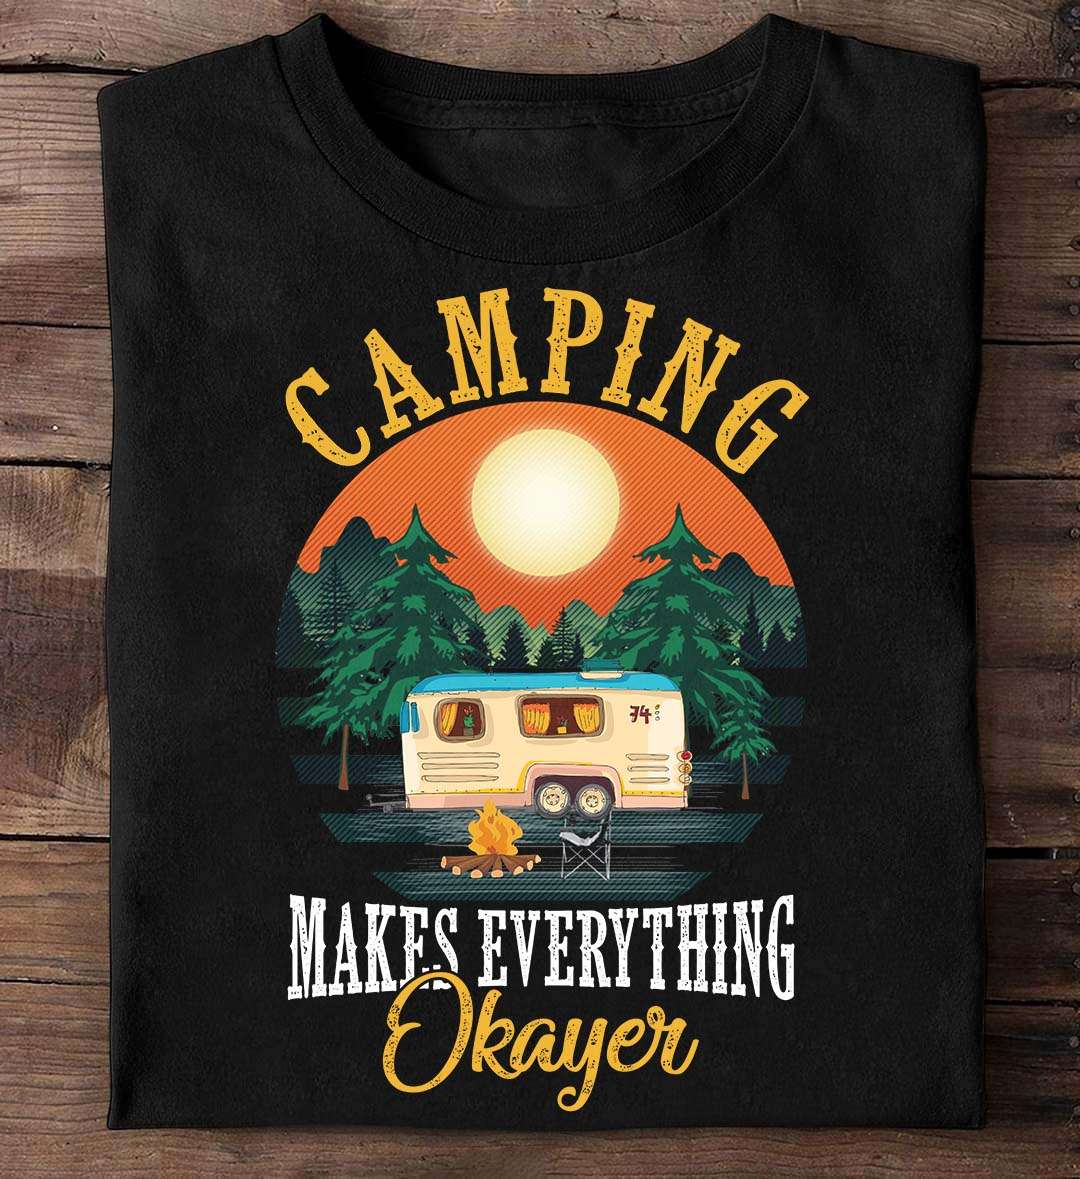 Camping makes everything okayer - Camping the hobby, camping in the wood